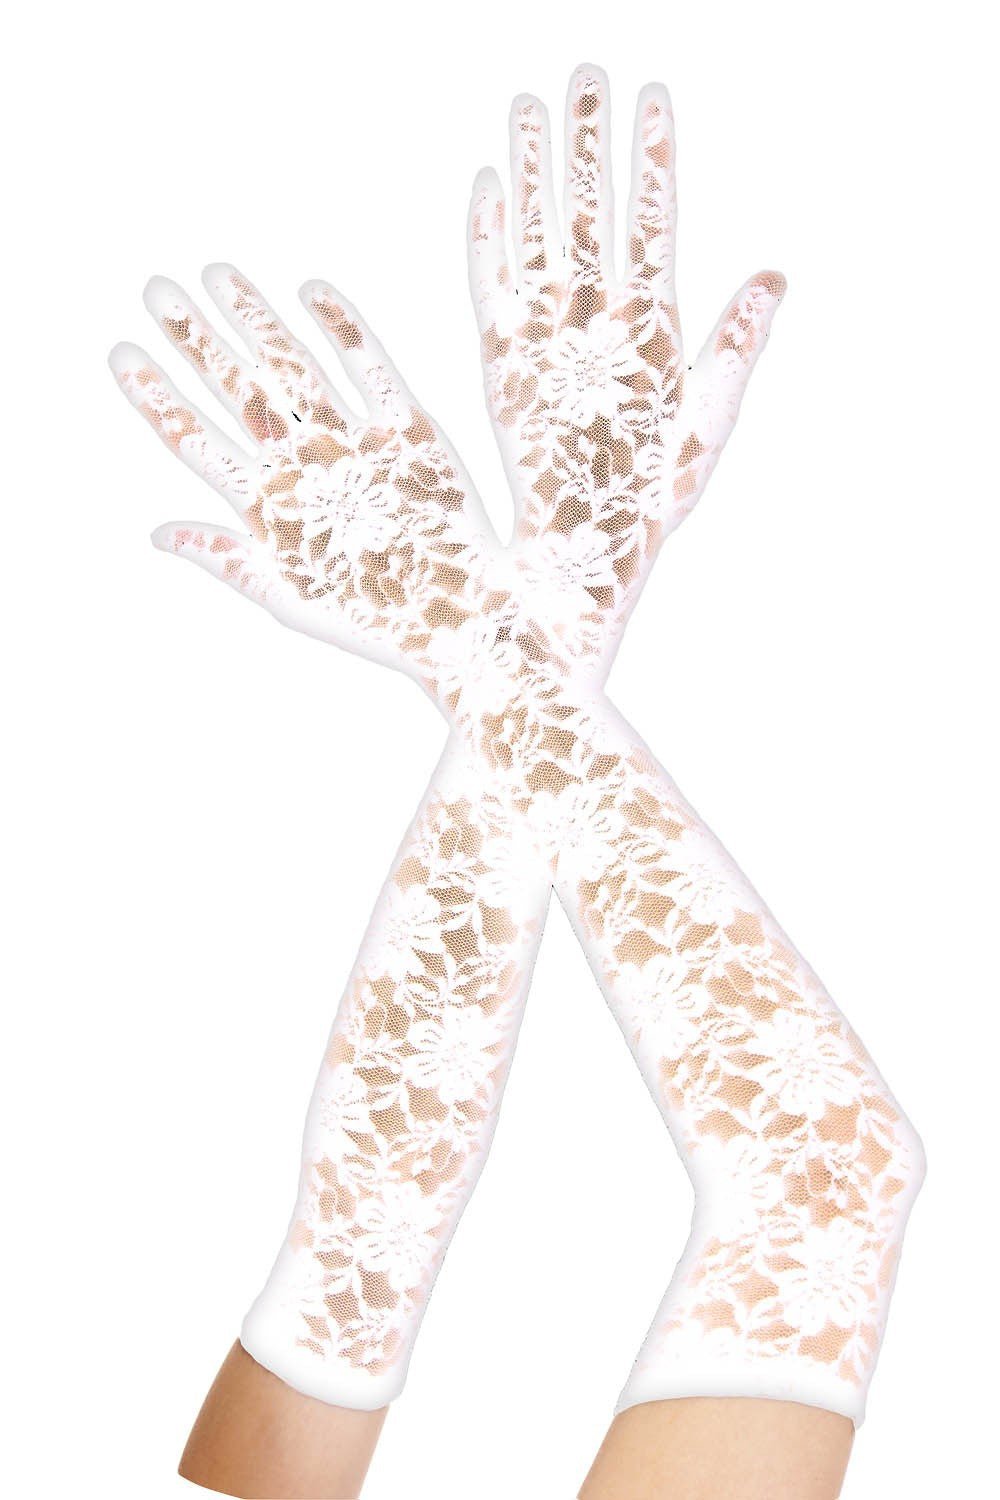 Elbow Length Lace Gloves White - Model Express VancouverAccessories